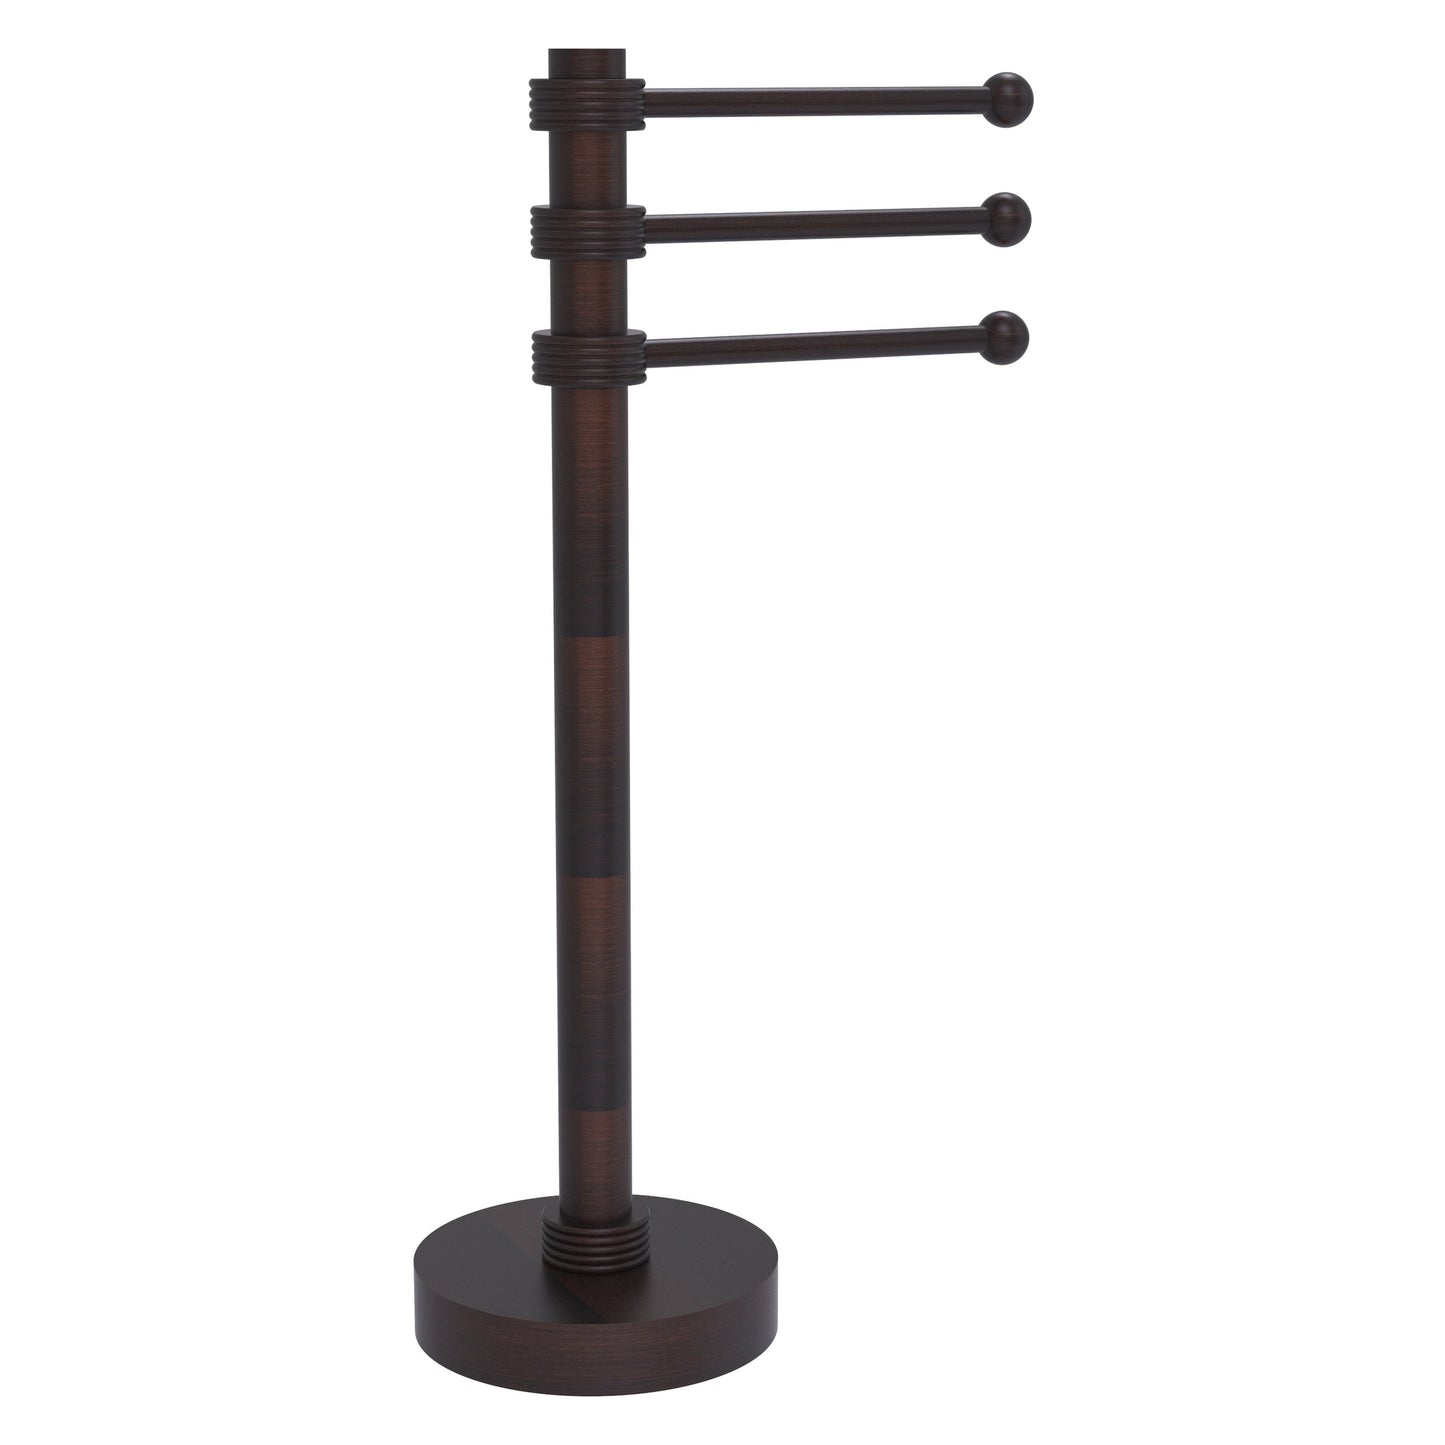 Allied Brass 973G 9" x 8" Venetian Bronze Solid Brass Vanity Top 3-Swing Arm Guest Towel Holder With Grooved Accents